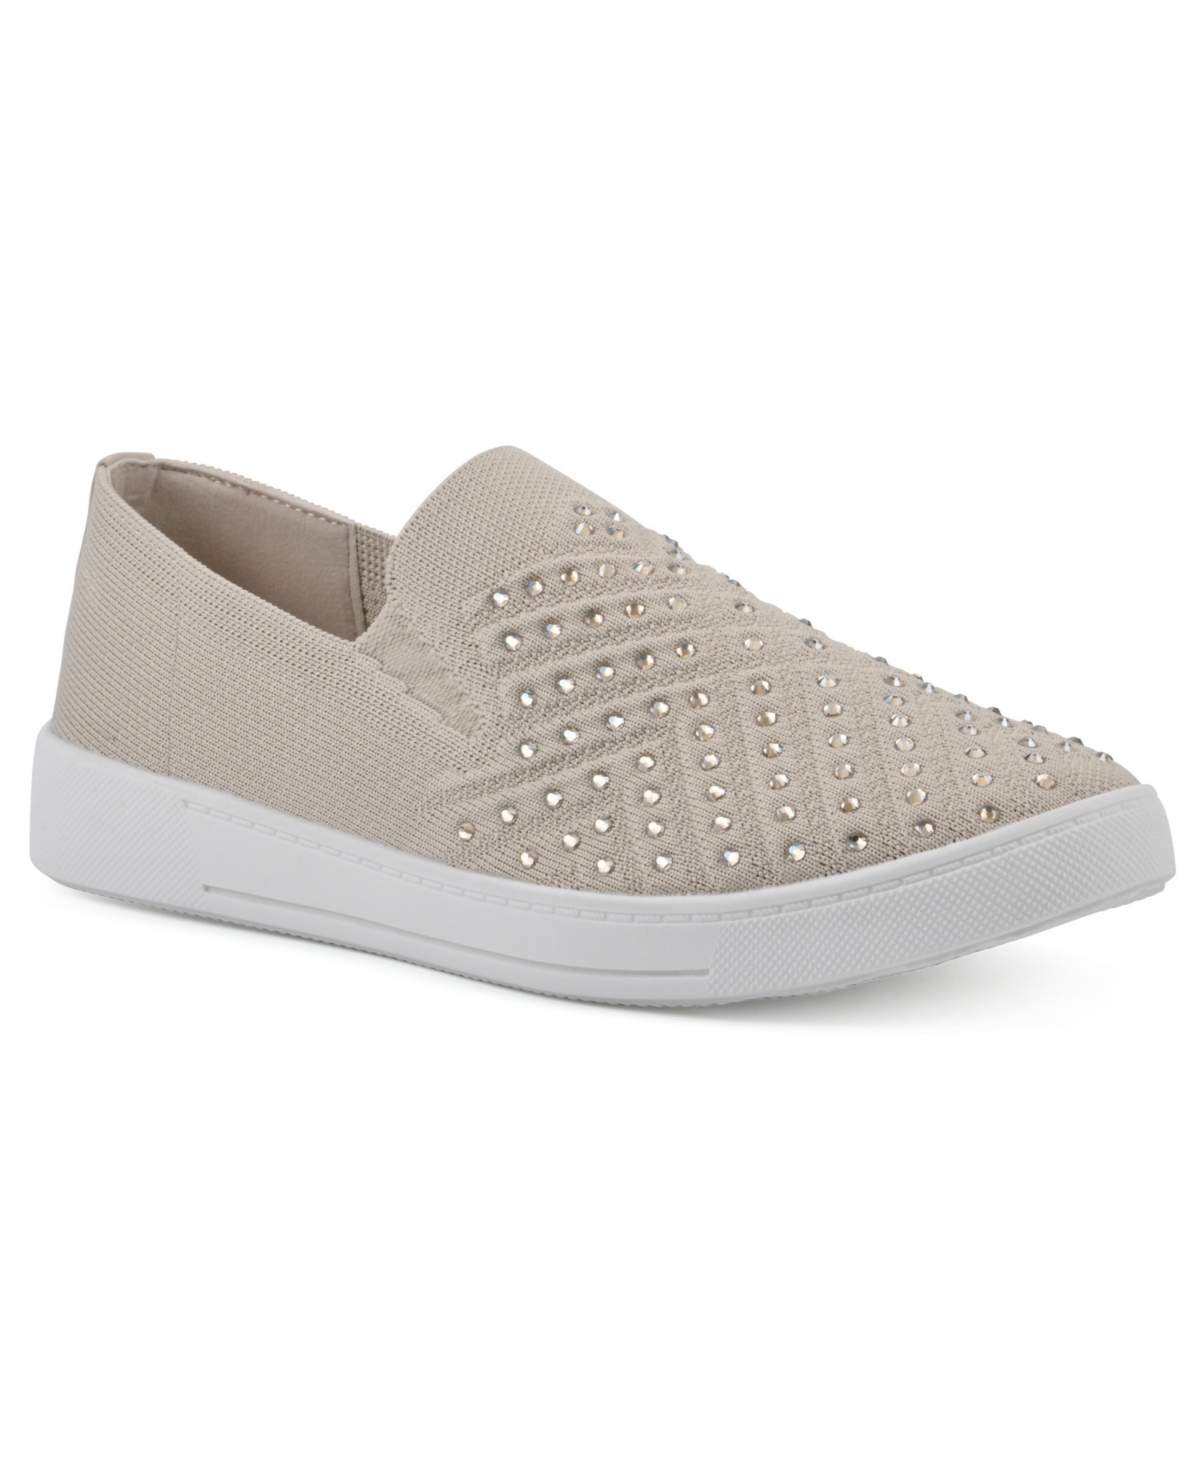 White Mountain Upbring Slip On Sneakers In Taupe Fabric